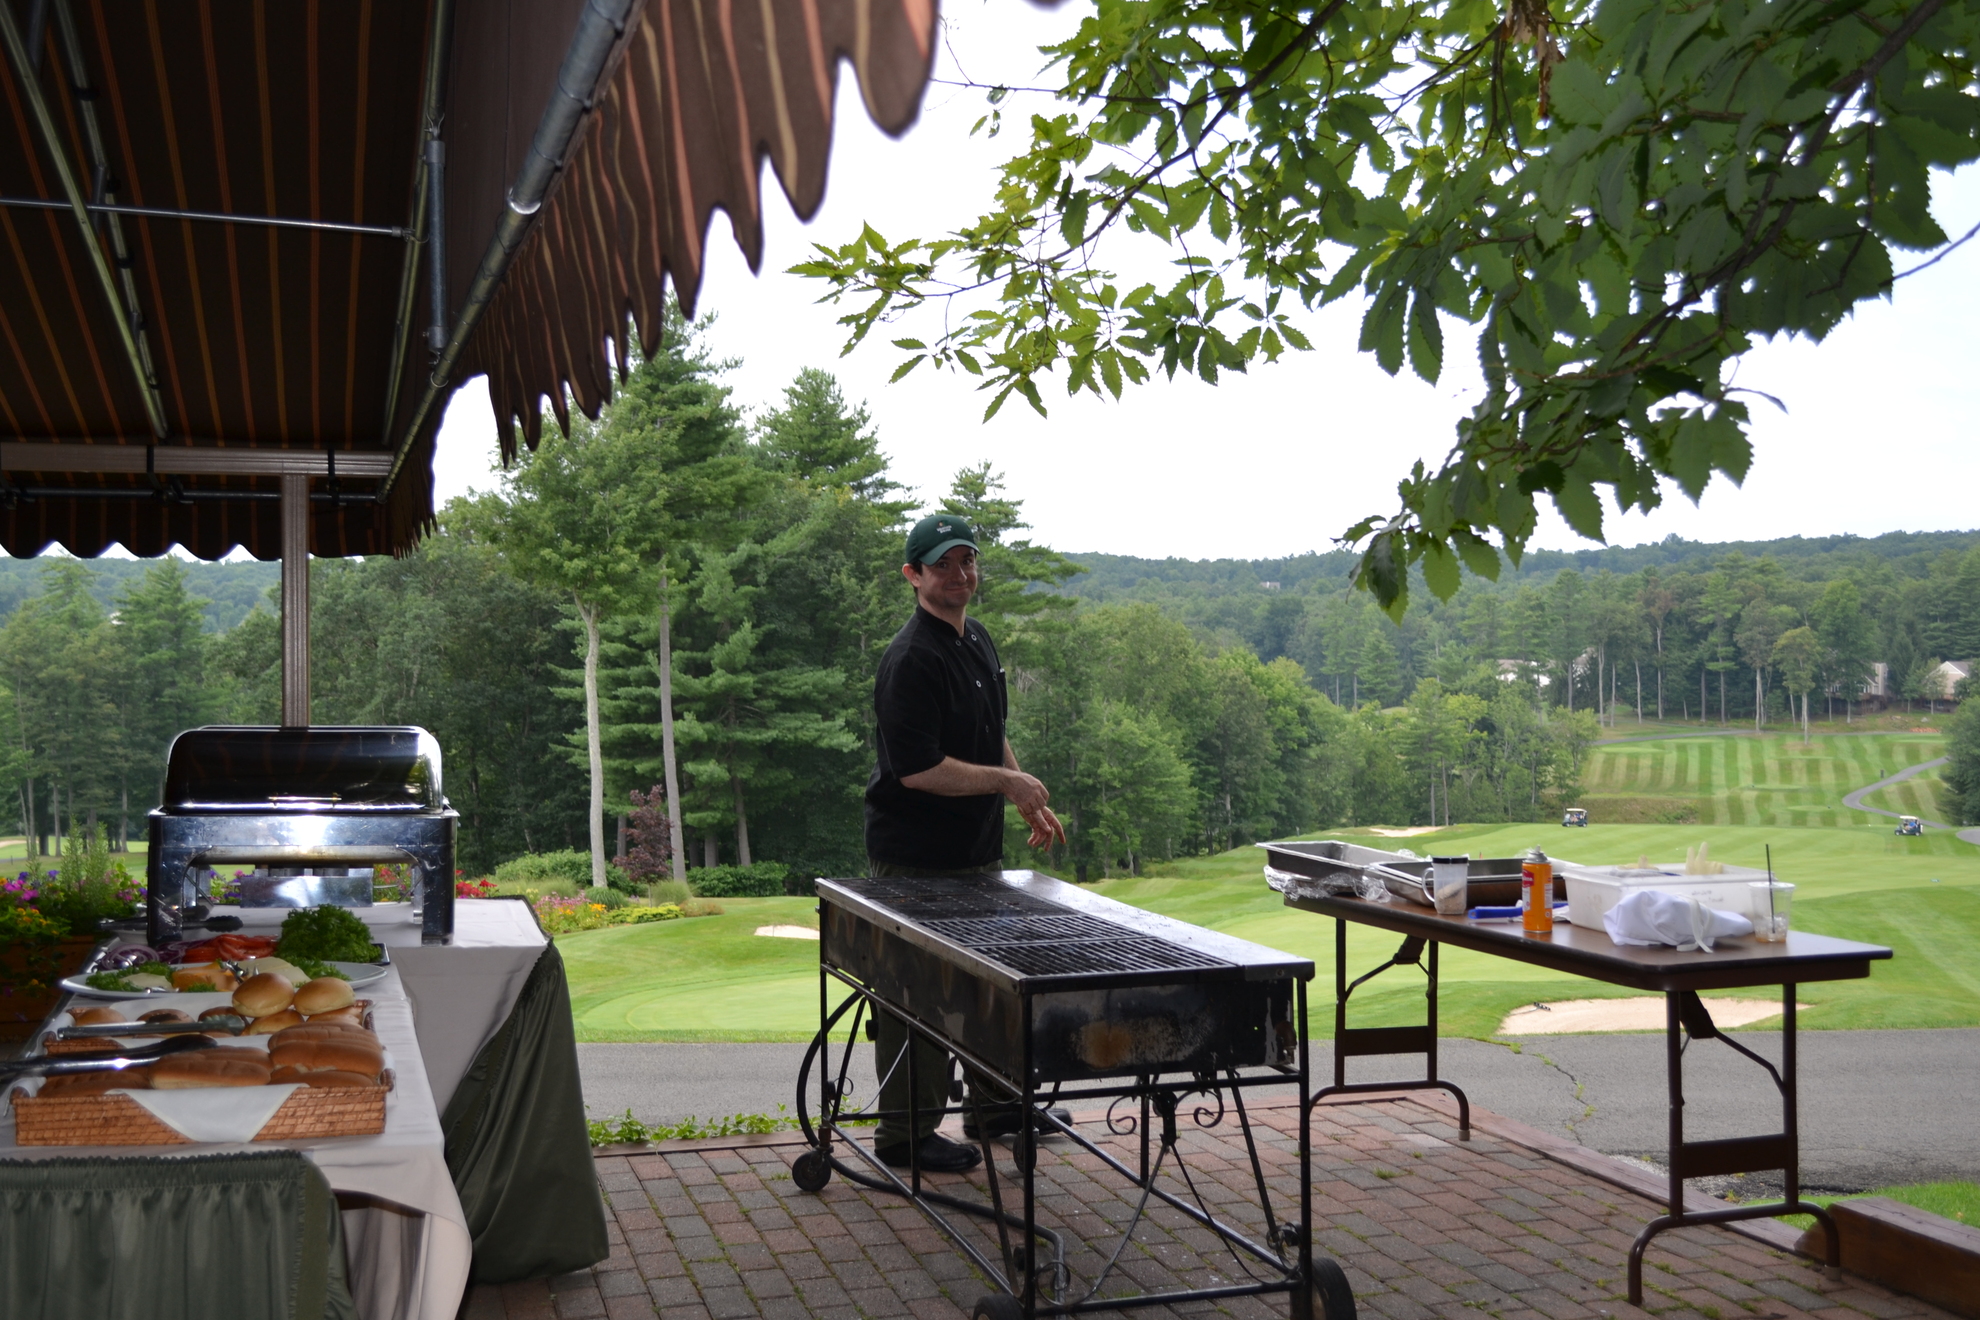 Chef prepping barbeque grill and buffet.